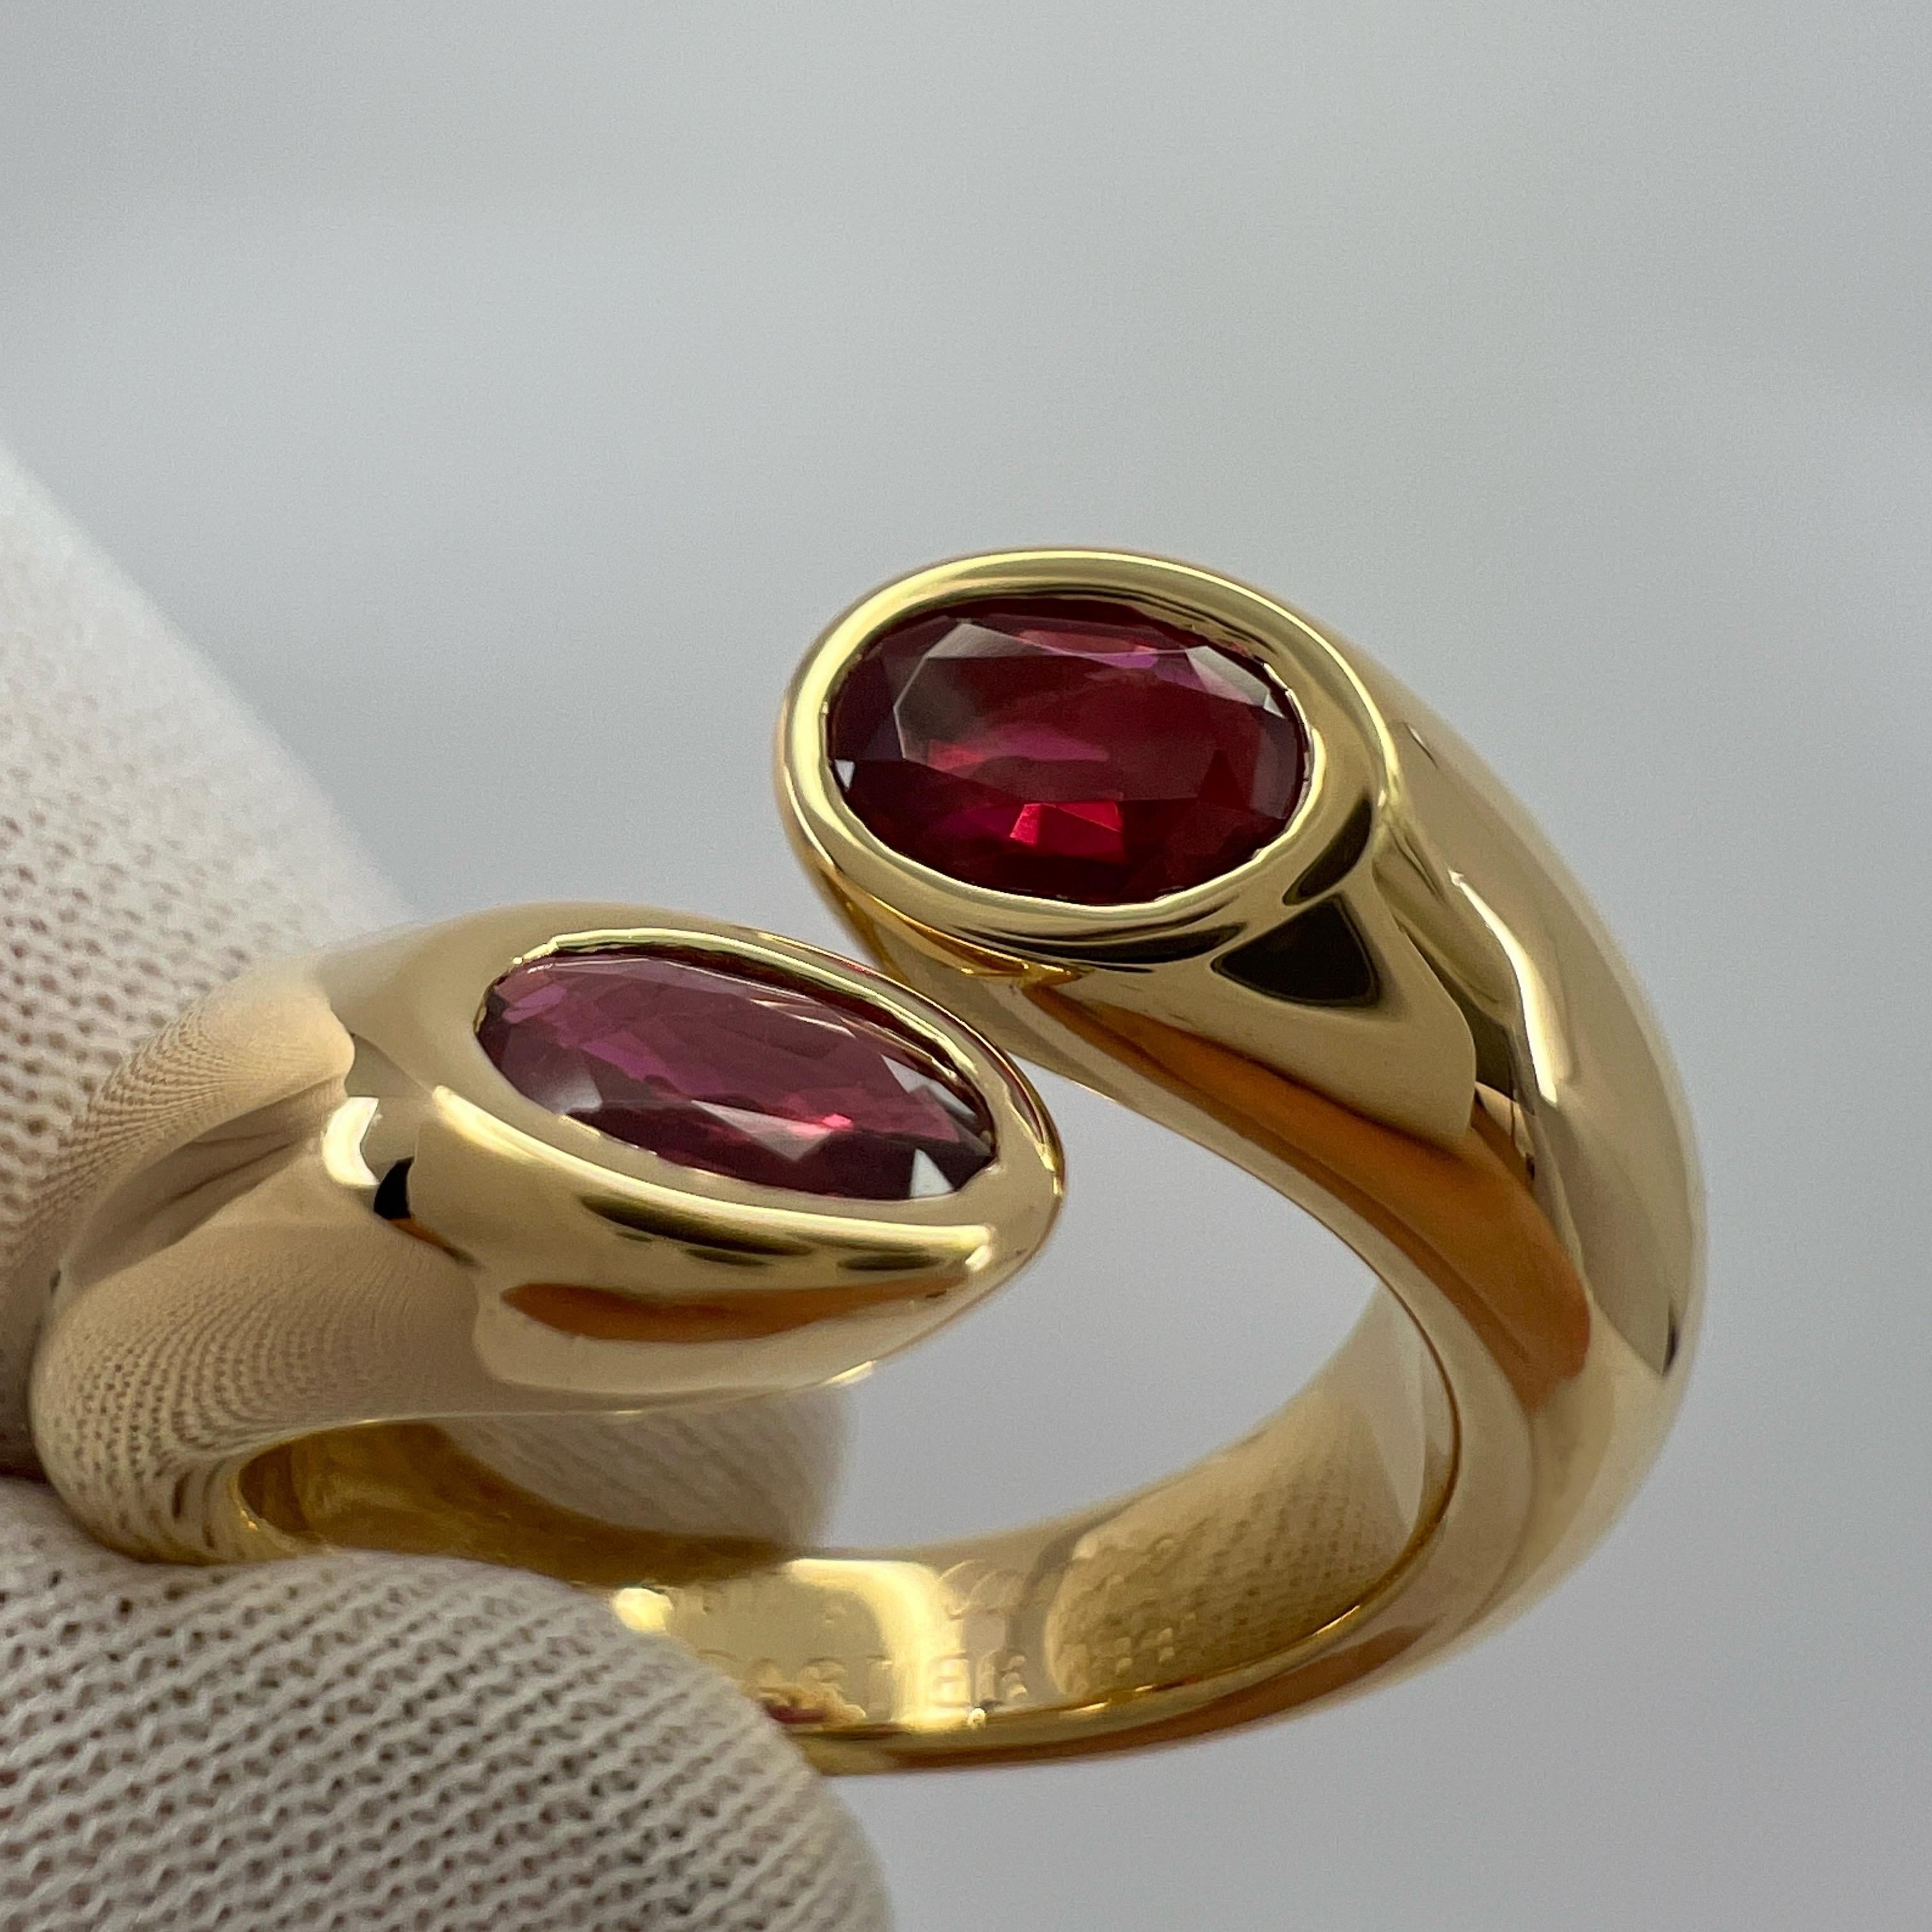 Rare Vintage Cartier Red Ruby Ellipse Oval Cut 18k Gold Bypass Split Ring 6.5 52 3